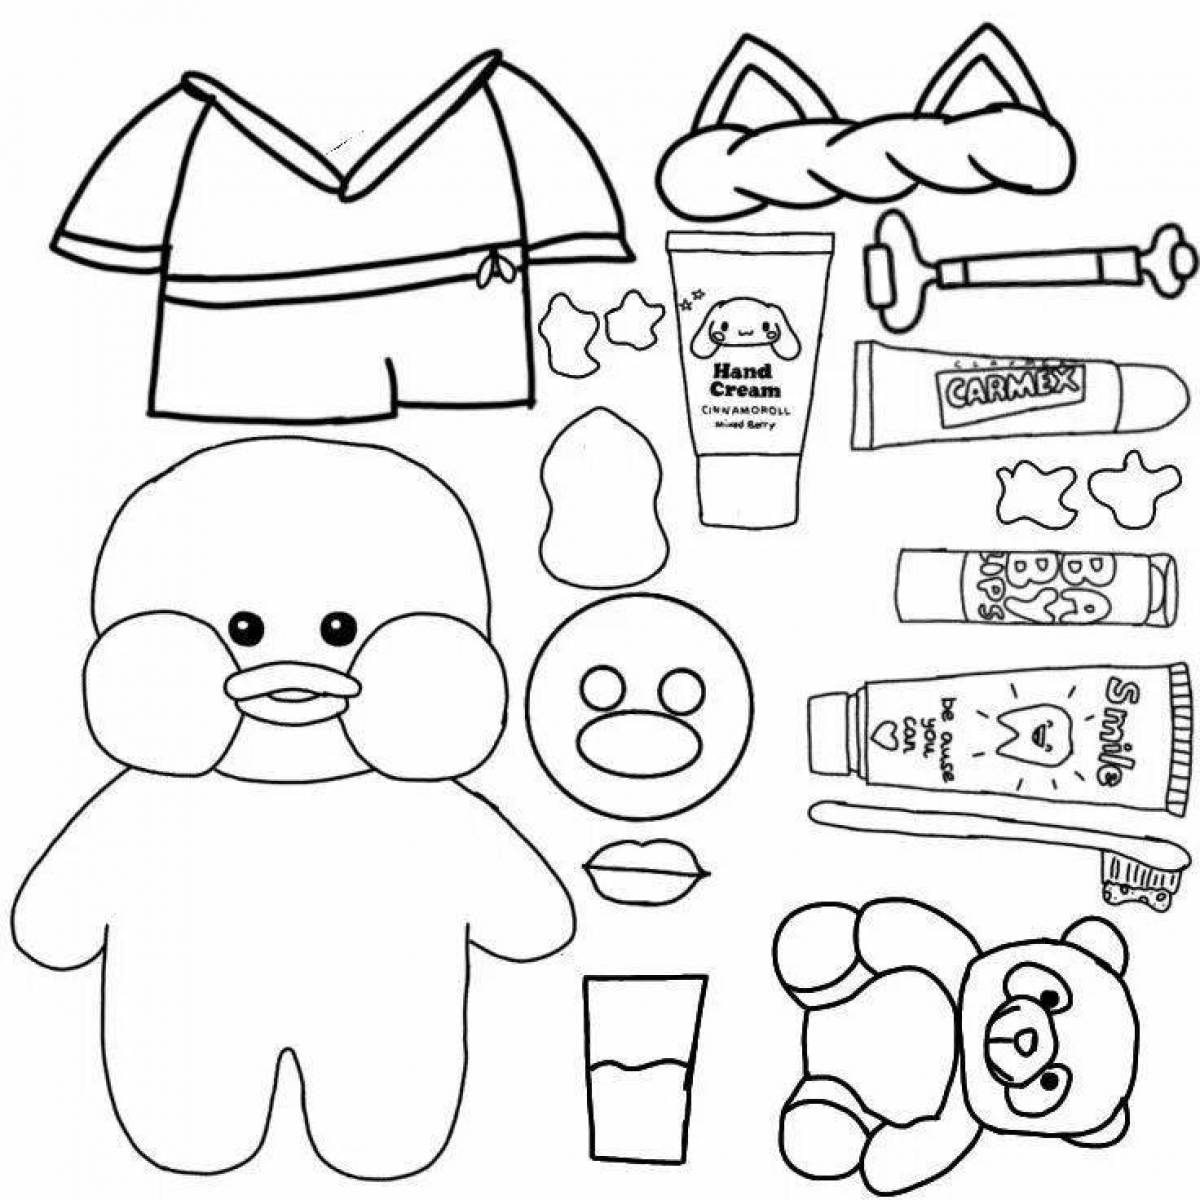 Lalafanfan duck with clothes and cosmetics #5